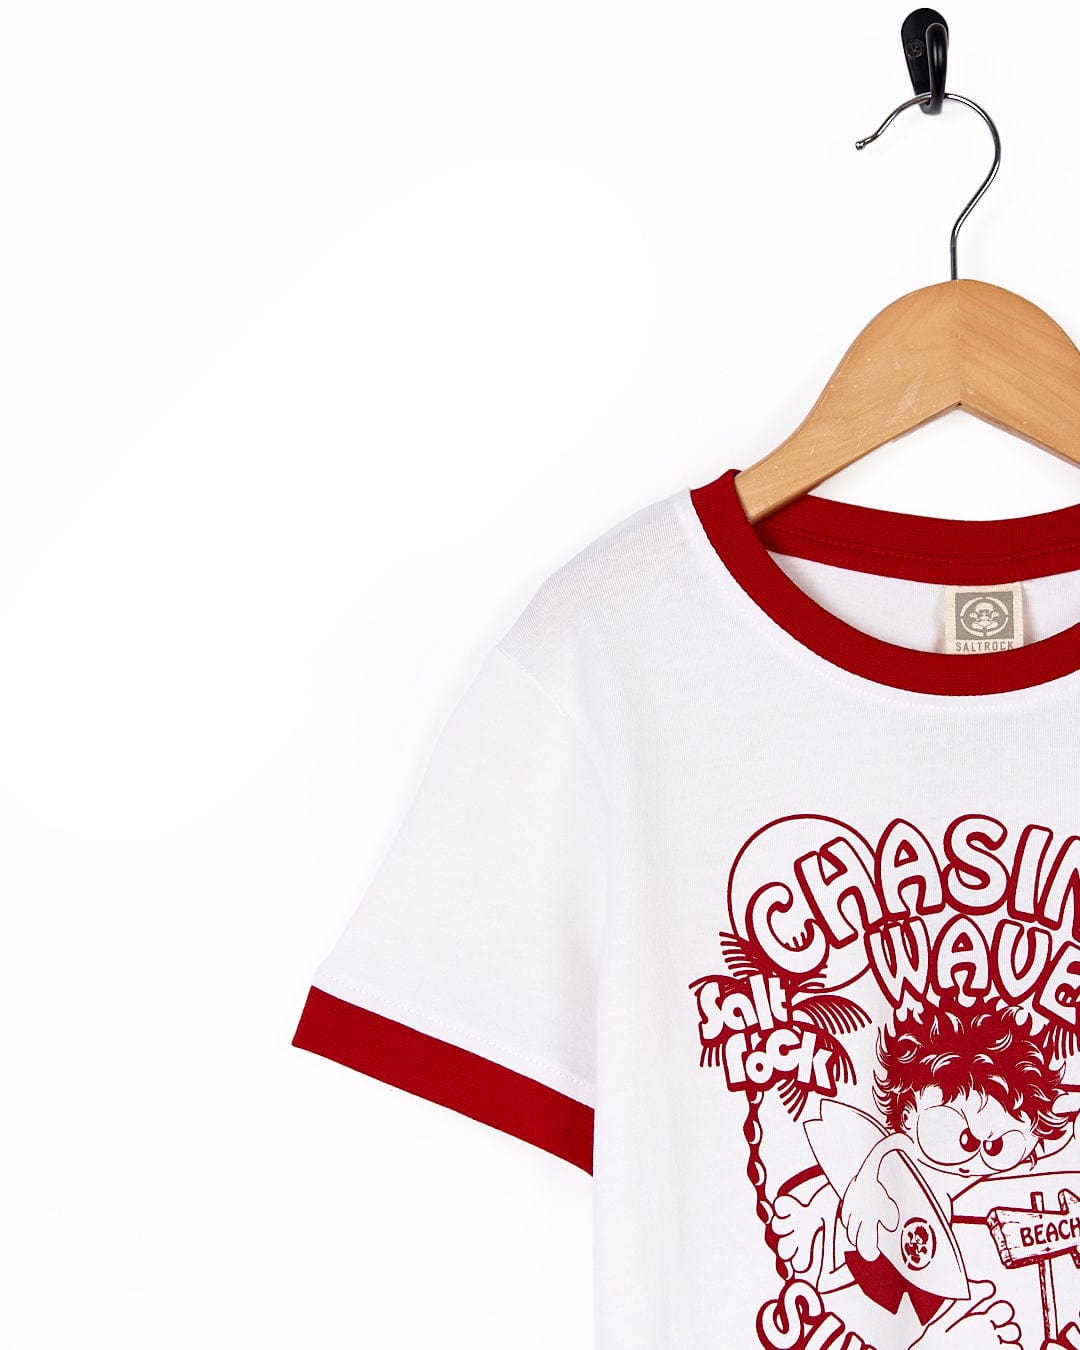 A Saltrock Chasing Waves Kids Short Sleeve T-Shirt that says chasing waves.